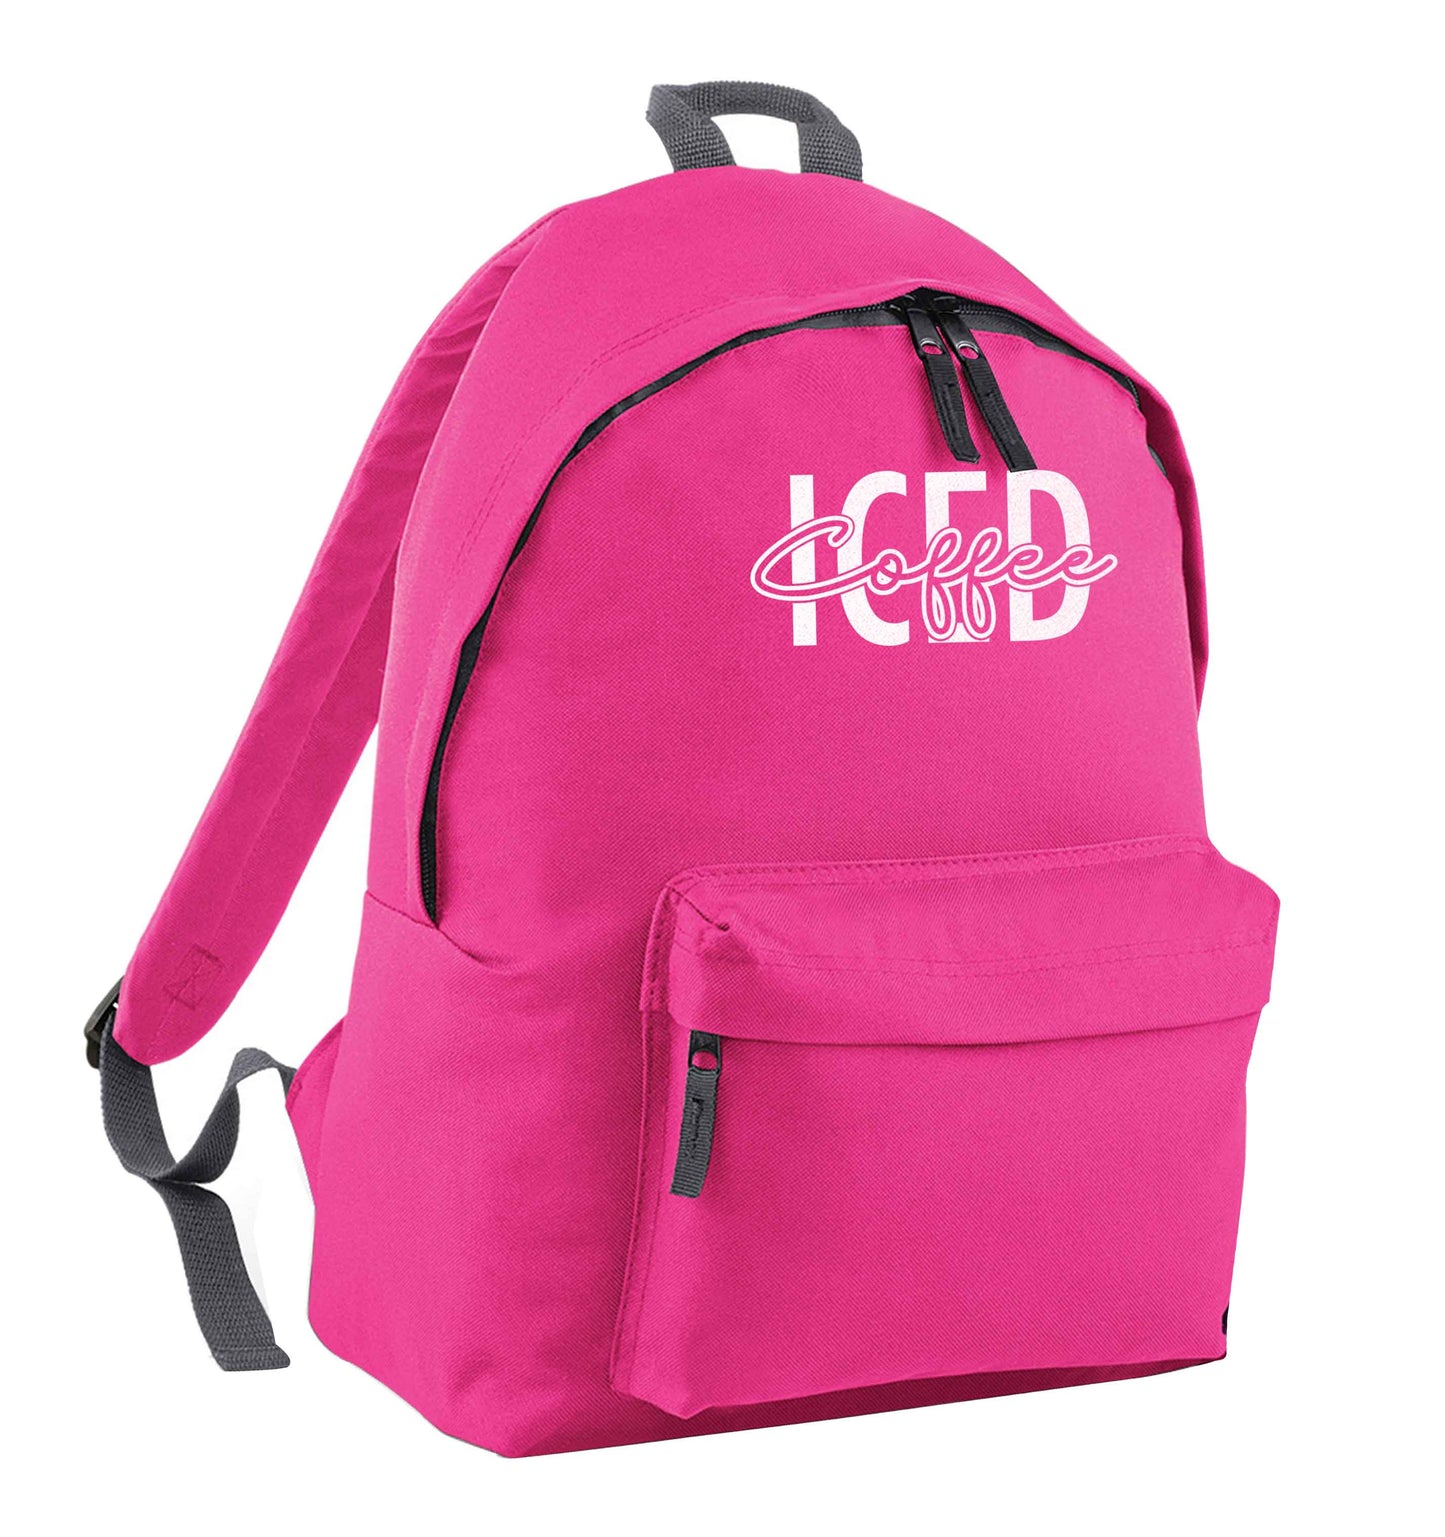 Iced Coffee pink adults backpack